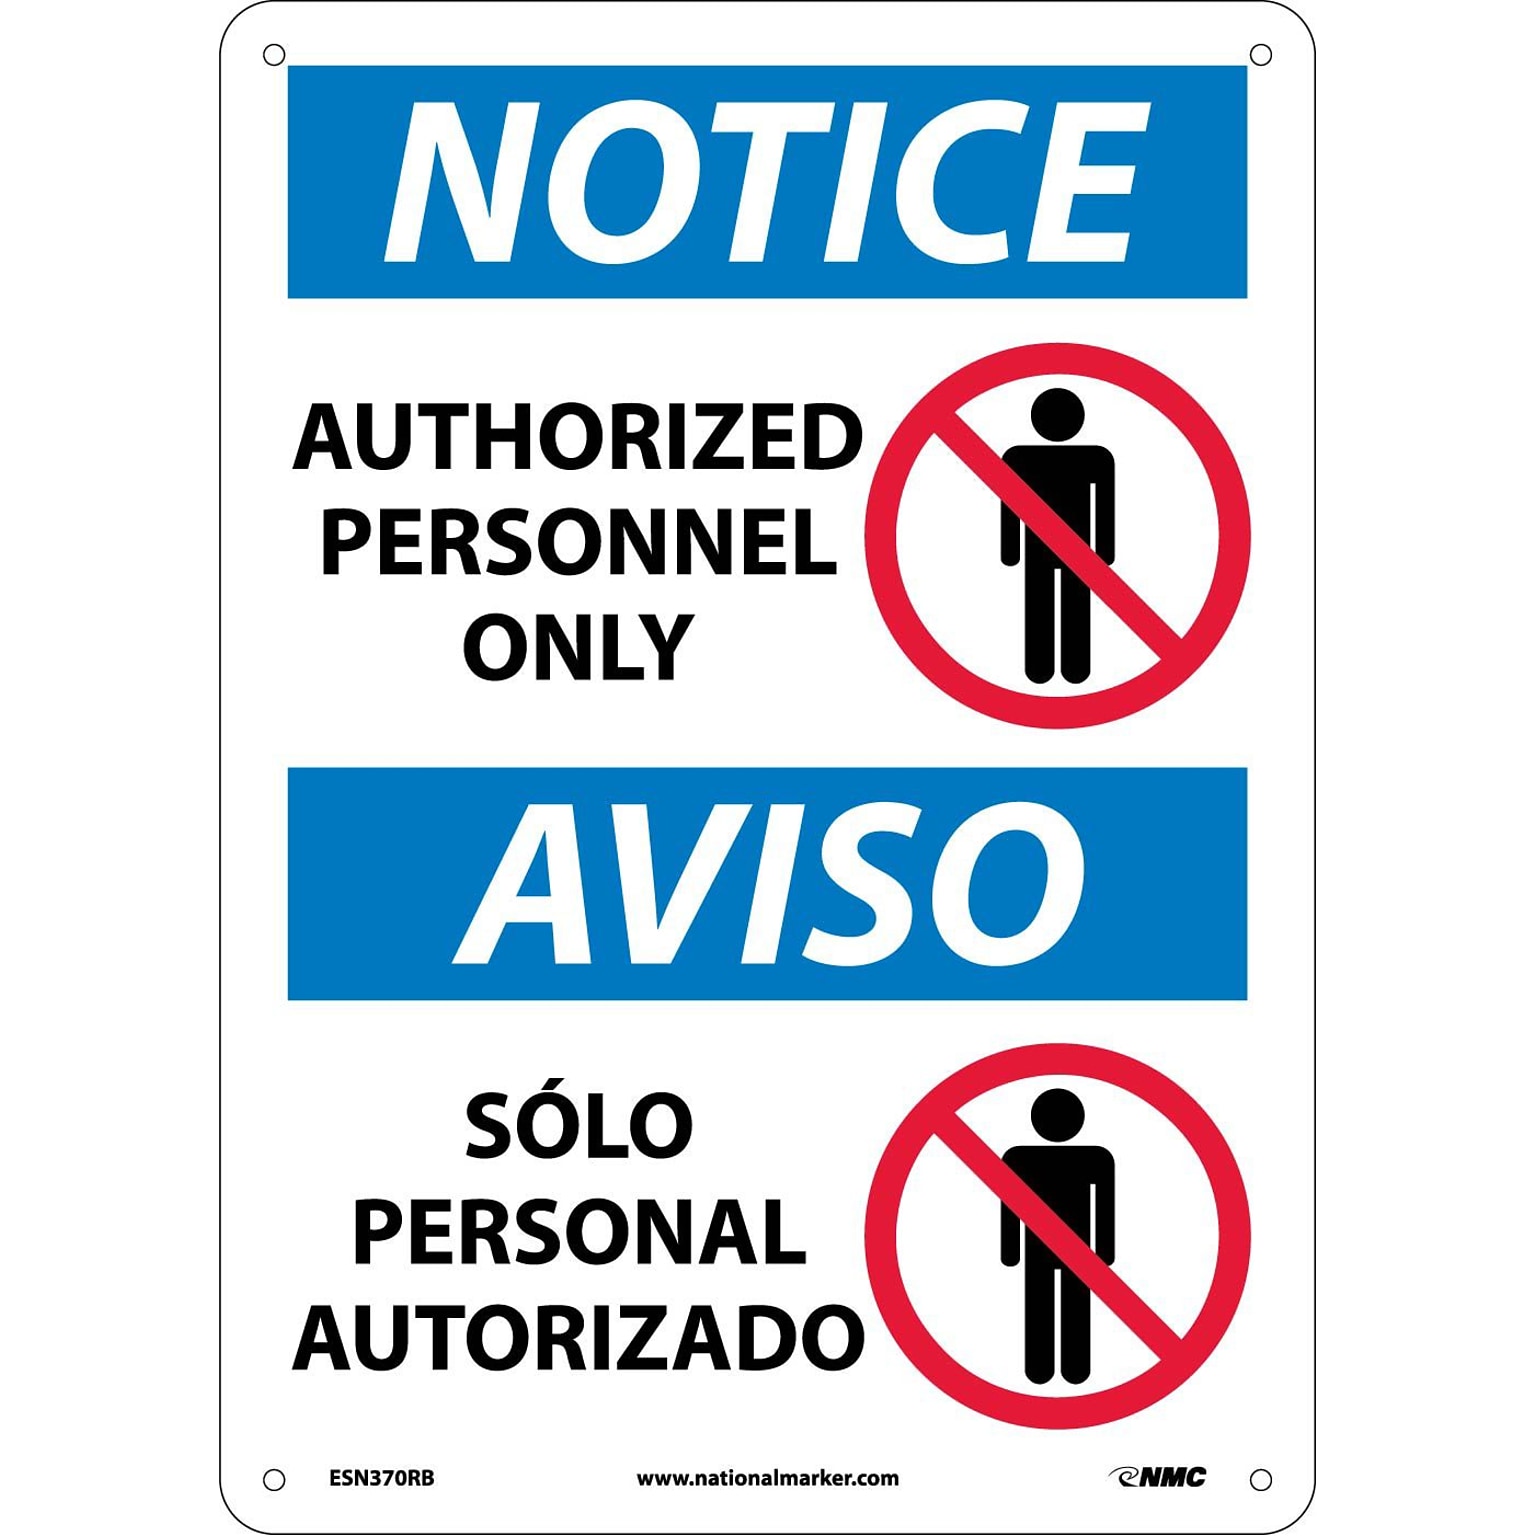 Authorized Personnel Only, Bilingual, (W/Graphic), 14X10, Rigid Plastic, Notice Sign